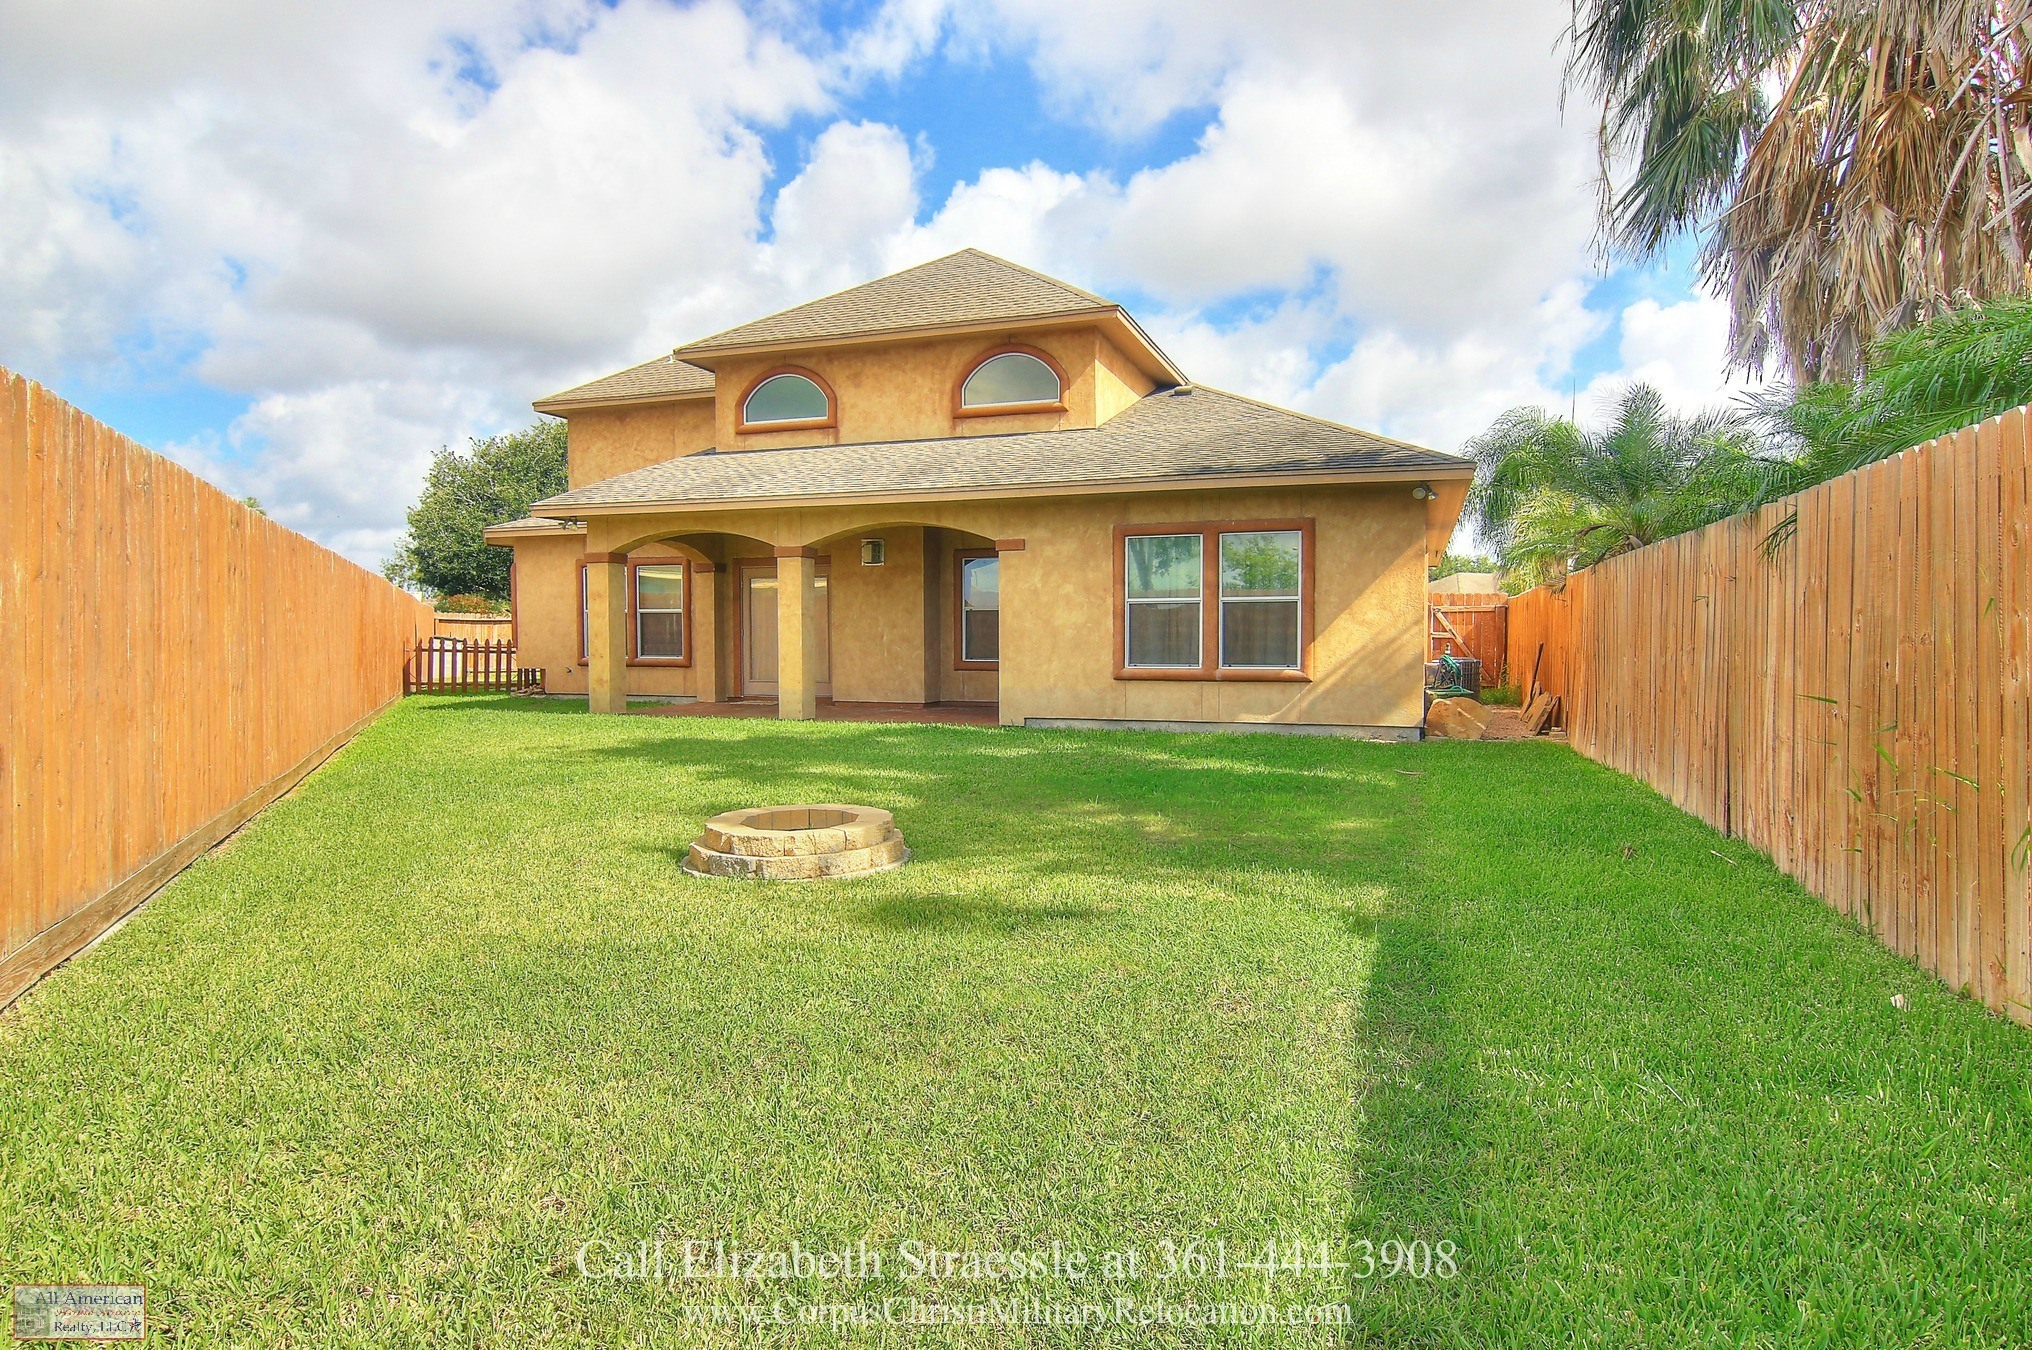  Real Estate Properties for Sale in Corpus Christi TX - Enjoy easy access to amenities and conveniences in this conveniently-located home for sale in Corpus Christi TX.